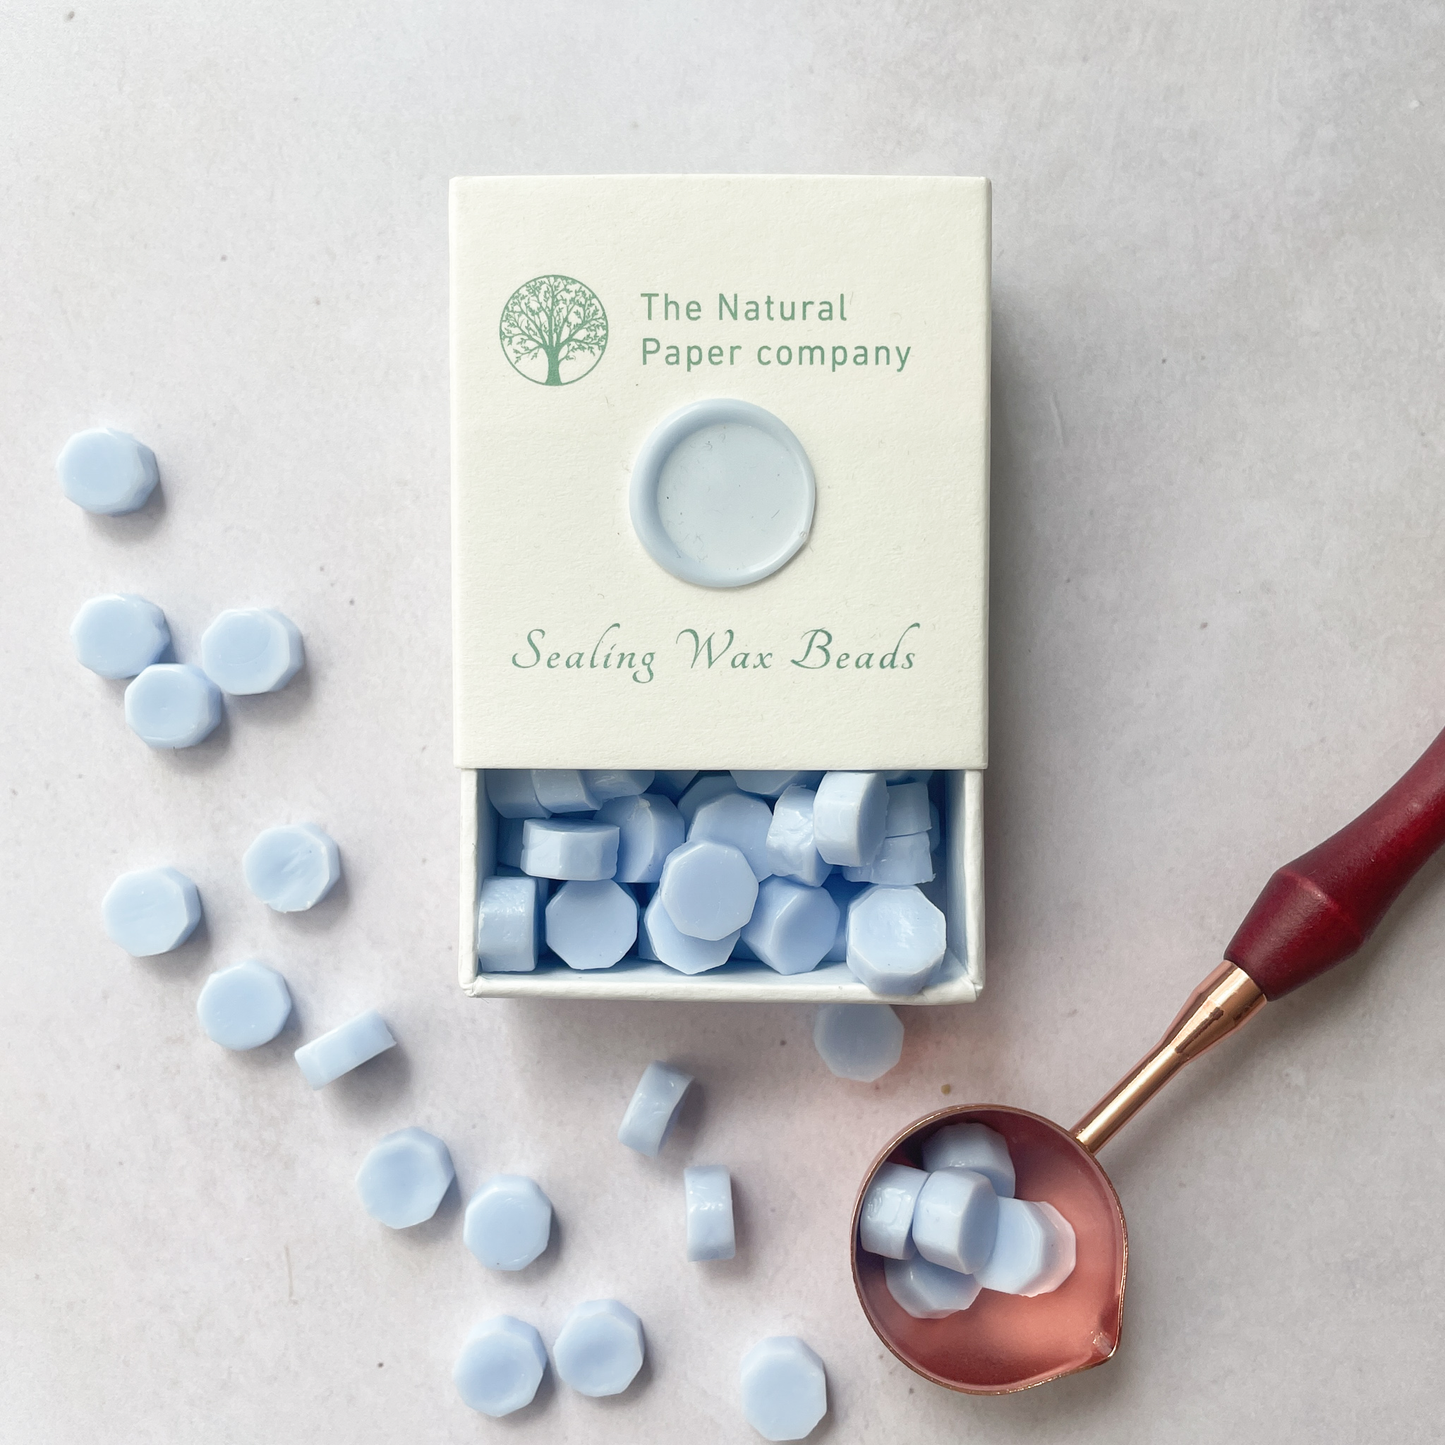 Box of sealing wax beads in sky blue.  Light blue wax to make wax seals for invitations, envelopes and packaging.  Plastic free, paraffin free and biodegradable wax.  By The Natural paper Company